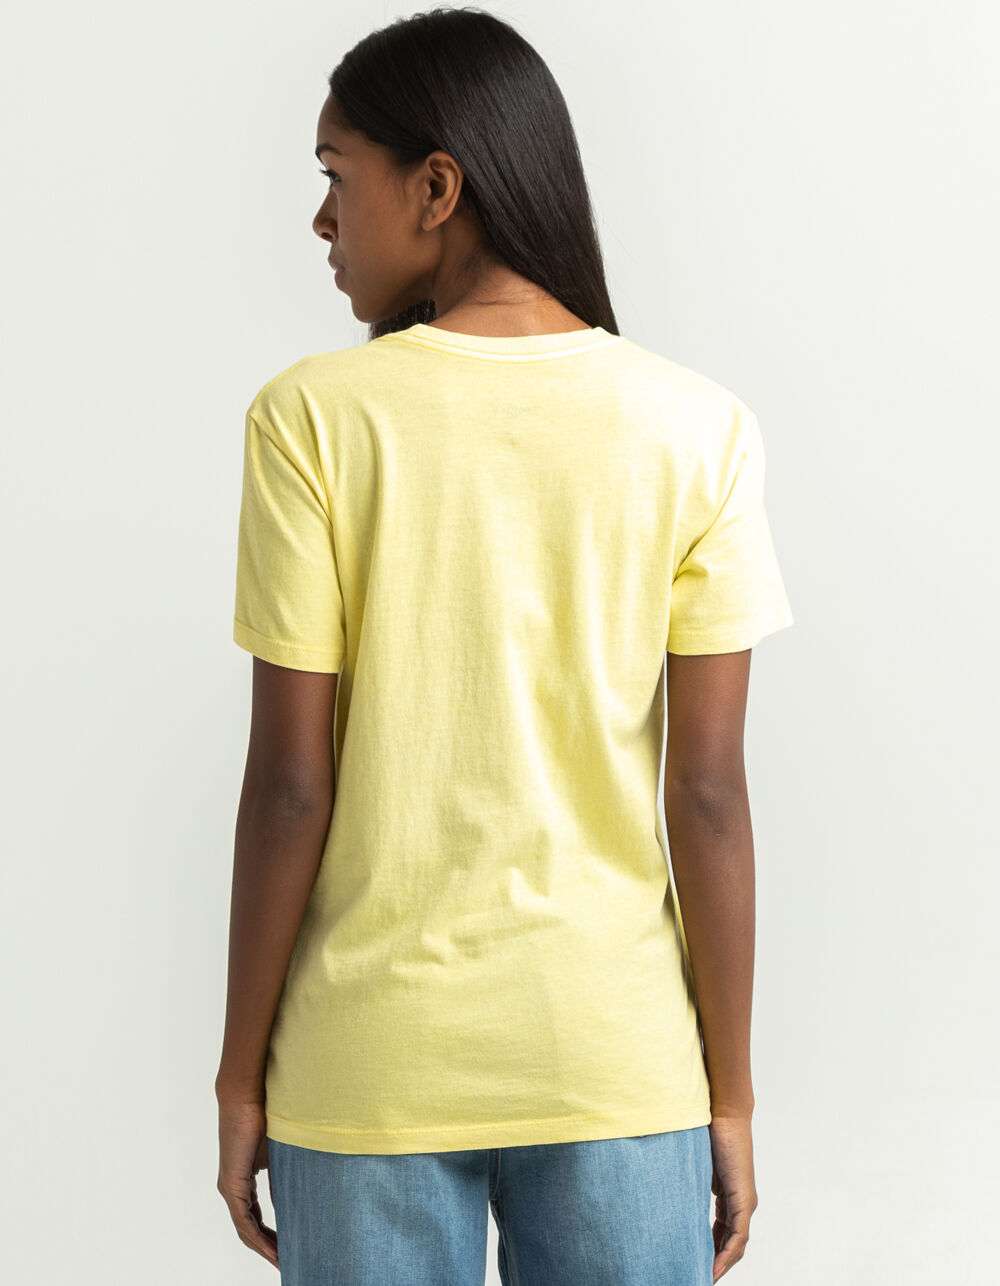 SMILEY® Positive Growth Womens Tee - YELLOW | Tillys